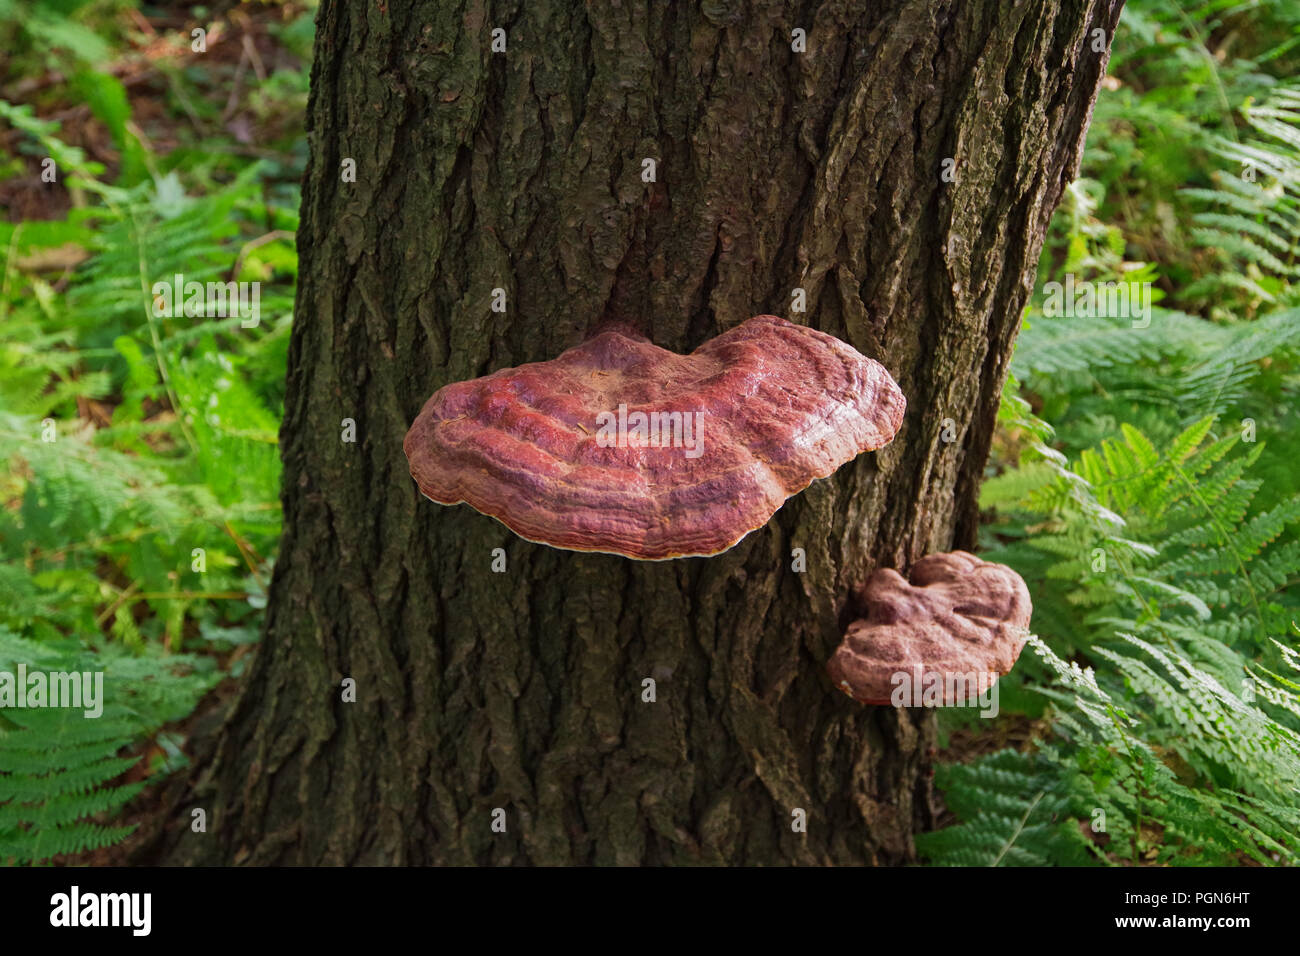 Wild Reishi Mushroom ( Ganoderma Tsugae ) growing on a Hemlock Tree. This medicinal herb is known for its immune supporting properties and benefits. Stock Photo